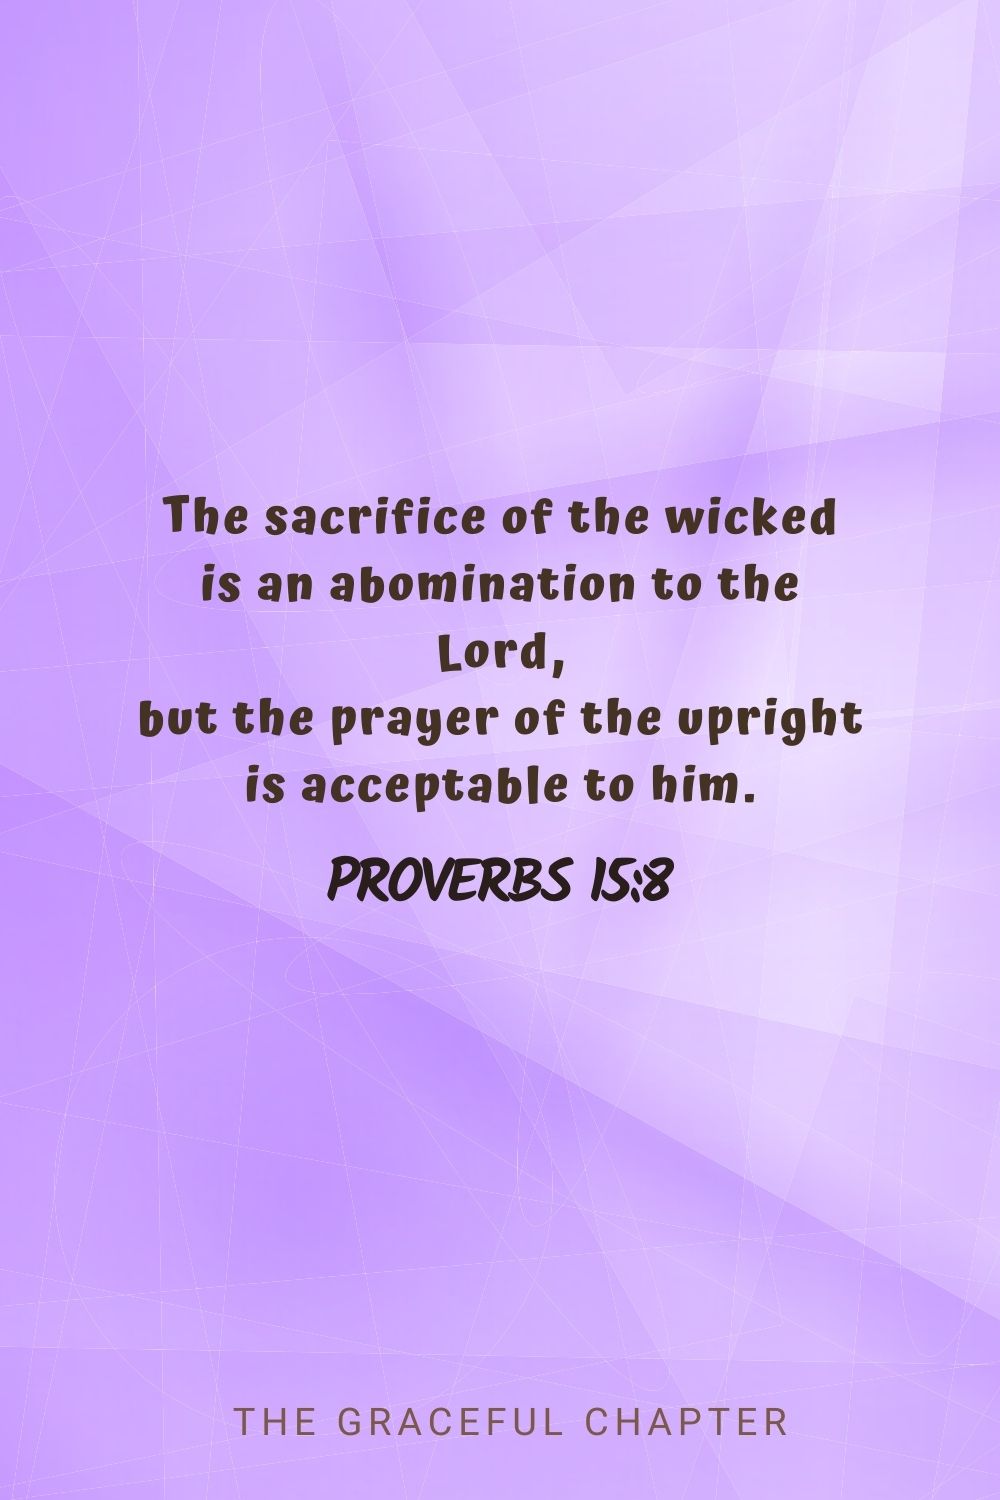 The sacrifice of the wicked is an abomination to the Lord, but the prayer of the upright is acceptable to him. Proverbs 15:8